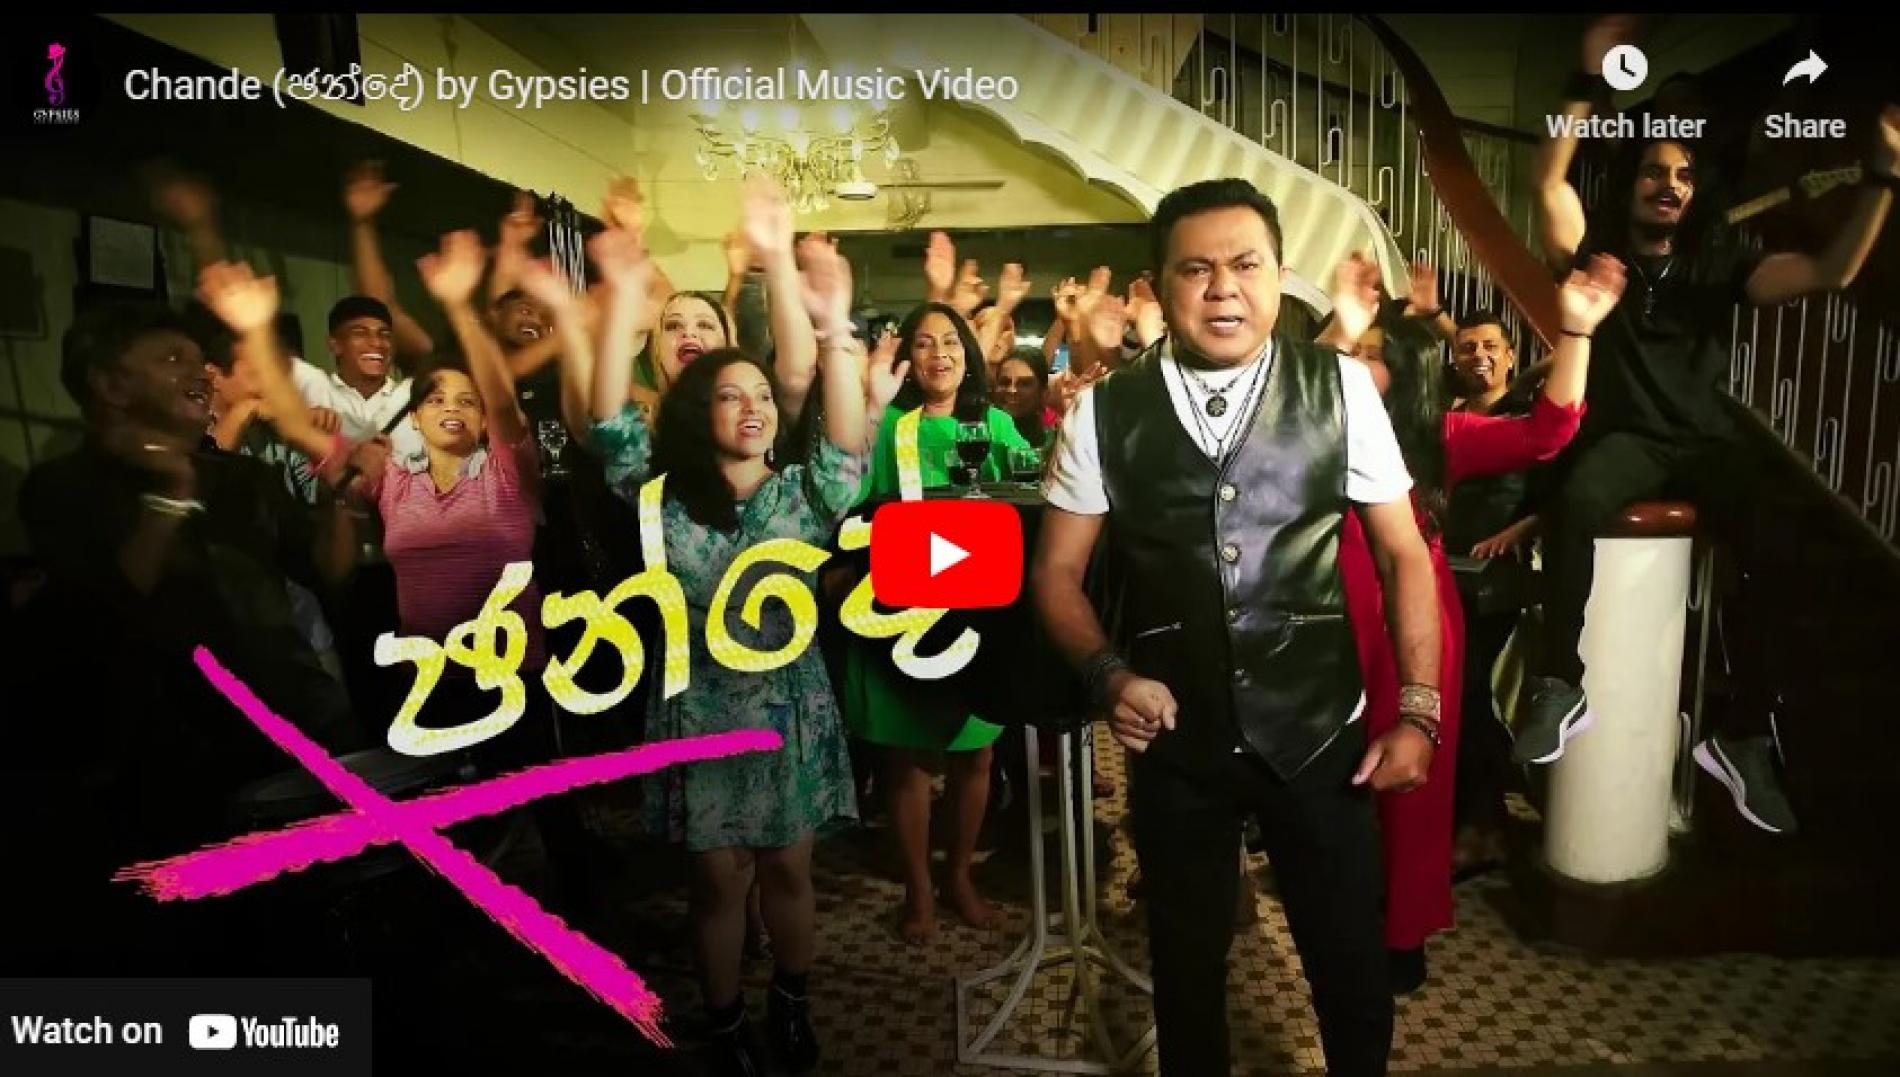 New Music : Chande (ඡන්දේ) by Gypsies | Official Music Video